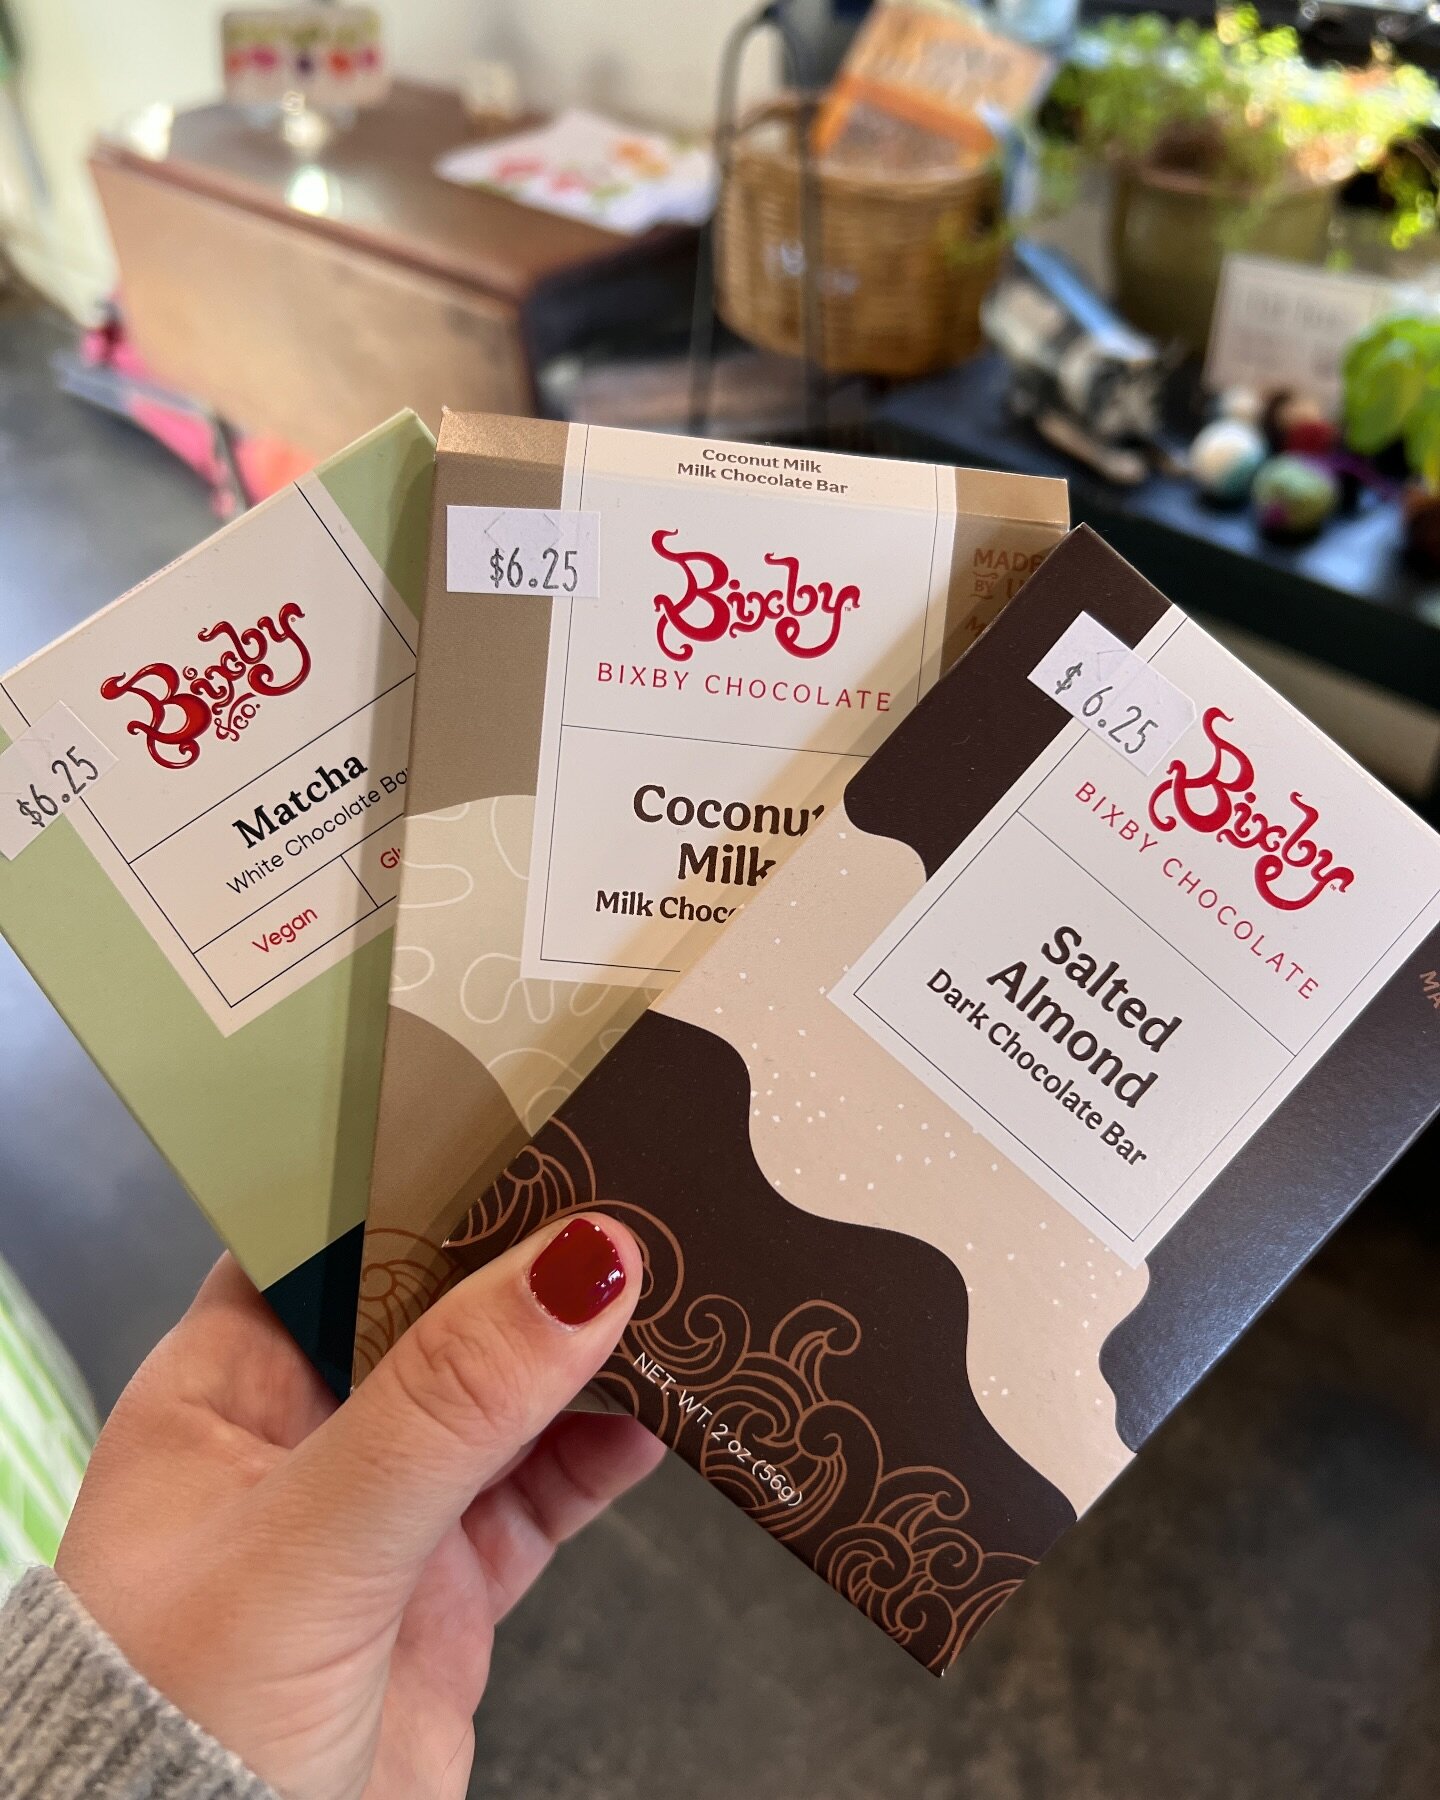 We are open 7:30-2 today with fresh baked goods, delicious treats like these @bixbychocolate bars and we&rsquo;re serving vegetable soup!

Come get cozy with us!